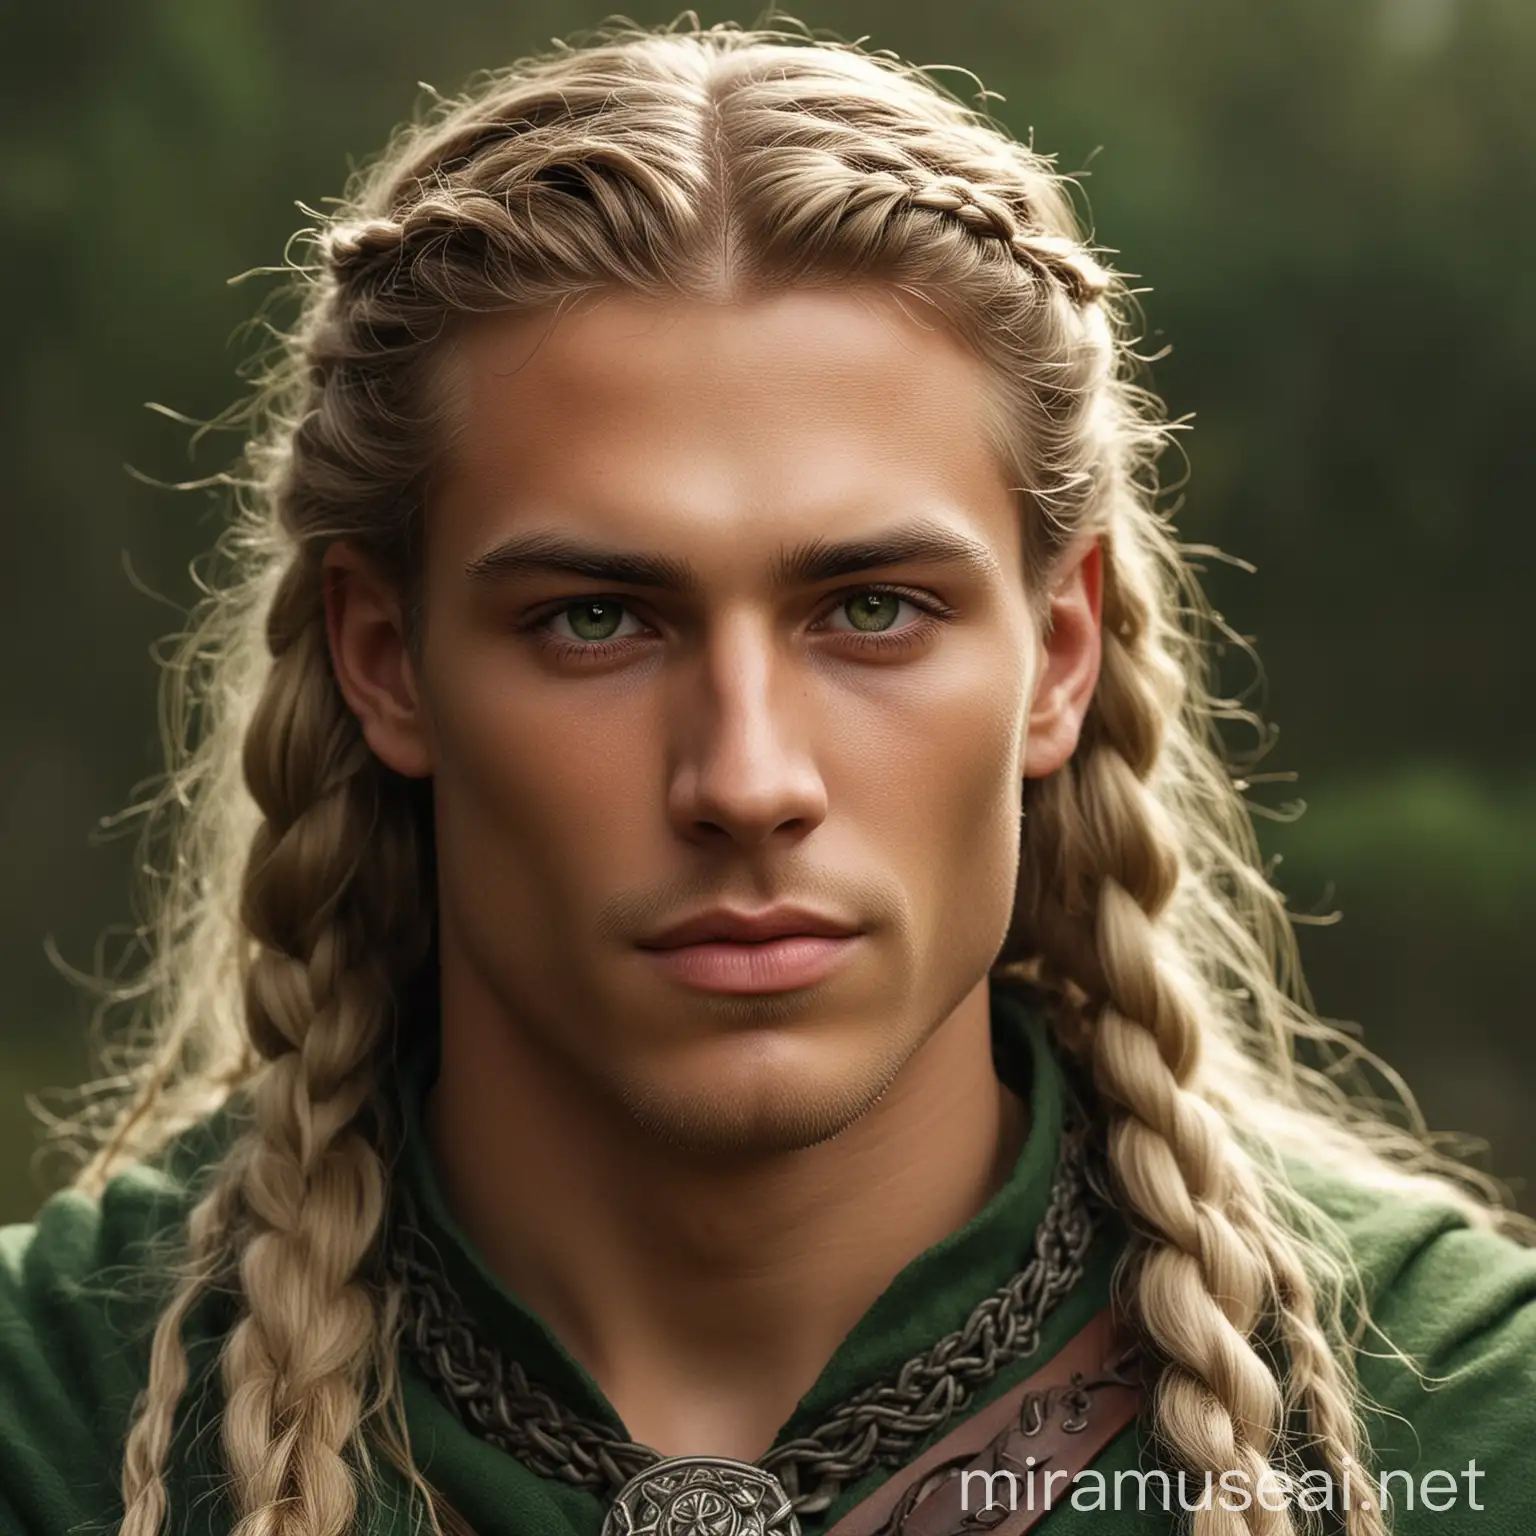 The fae man in the pictures. he is almond brown skintoned. has a strong jawline. His lips have a natural shape that complements his overall appearance. As for his eye color, it's a captivating shade of an Smaragd green. His hair is long and has an bleached blonde braided in the viking style..Lastly, his nose is straight, adding to the symmetry of his face. the picture gives you an natural vibe. he got an green medival lord outfit.